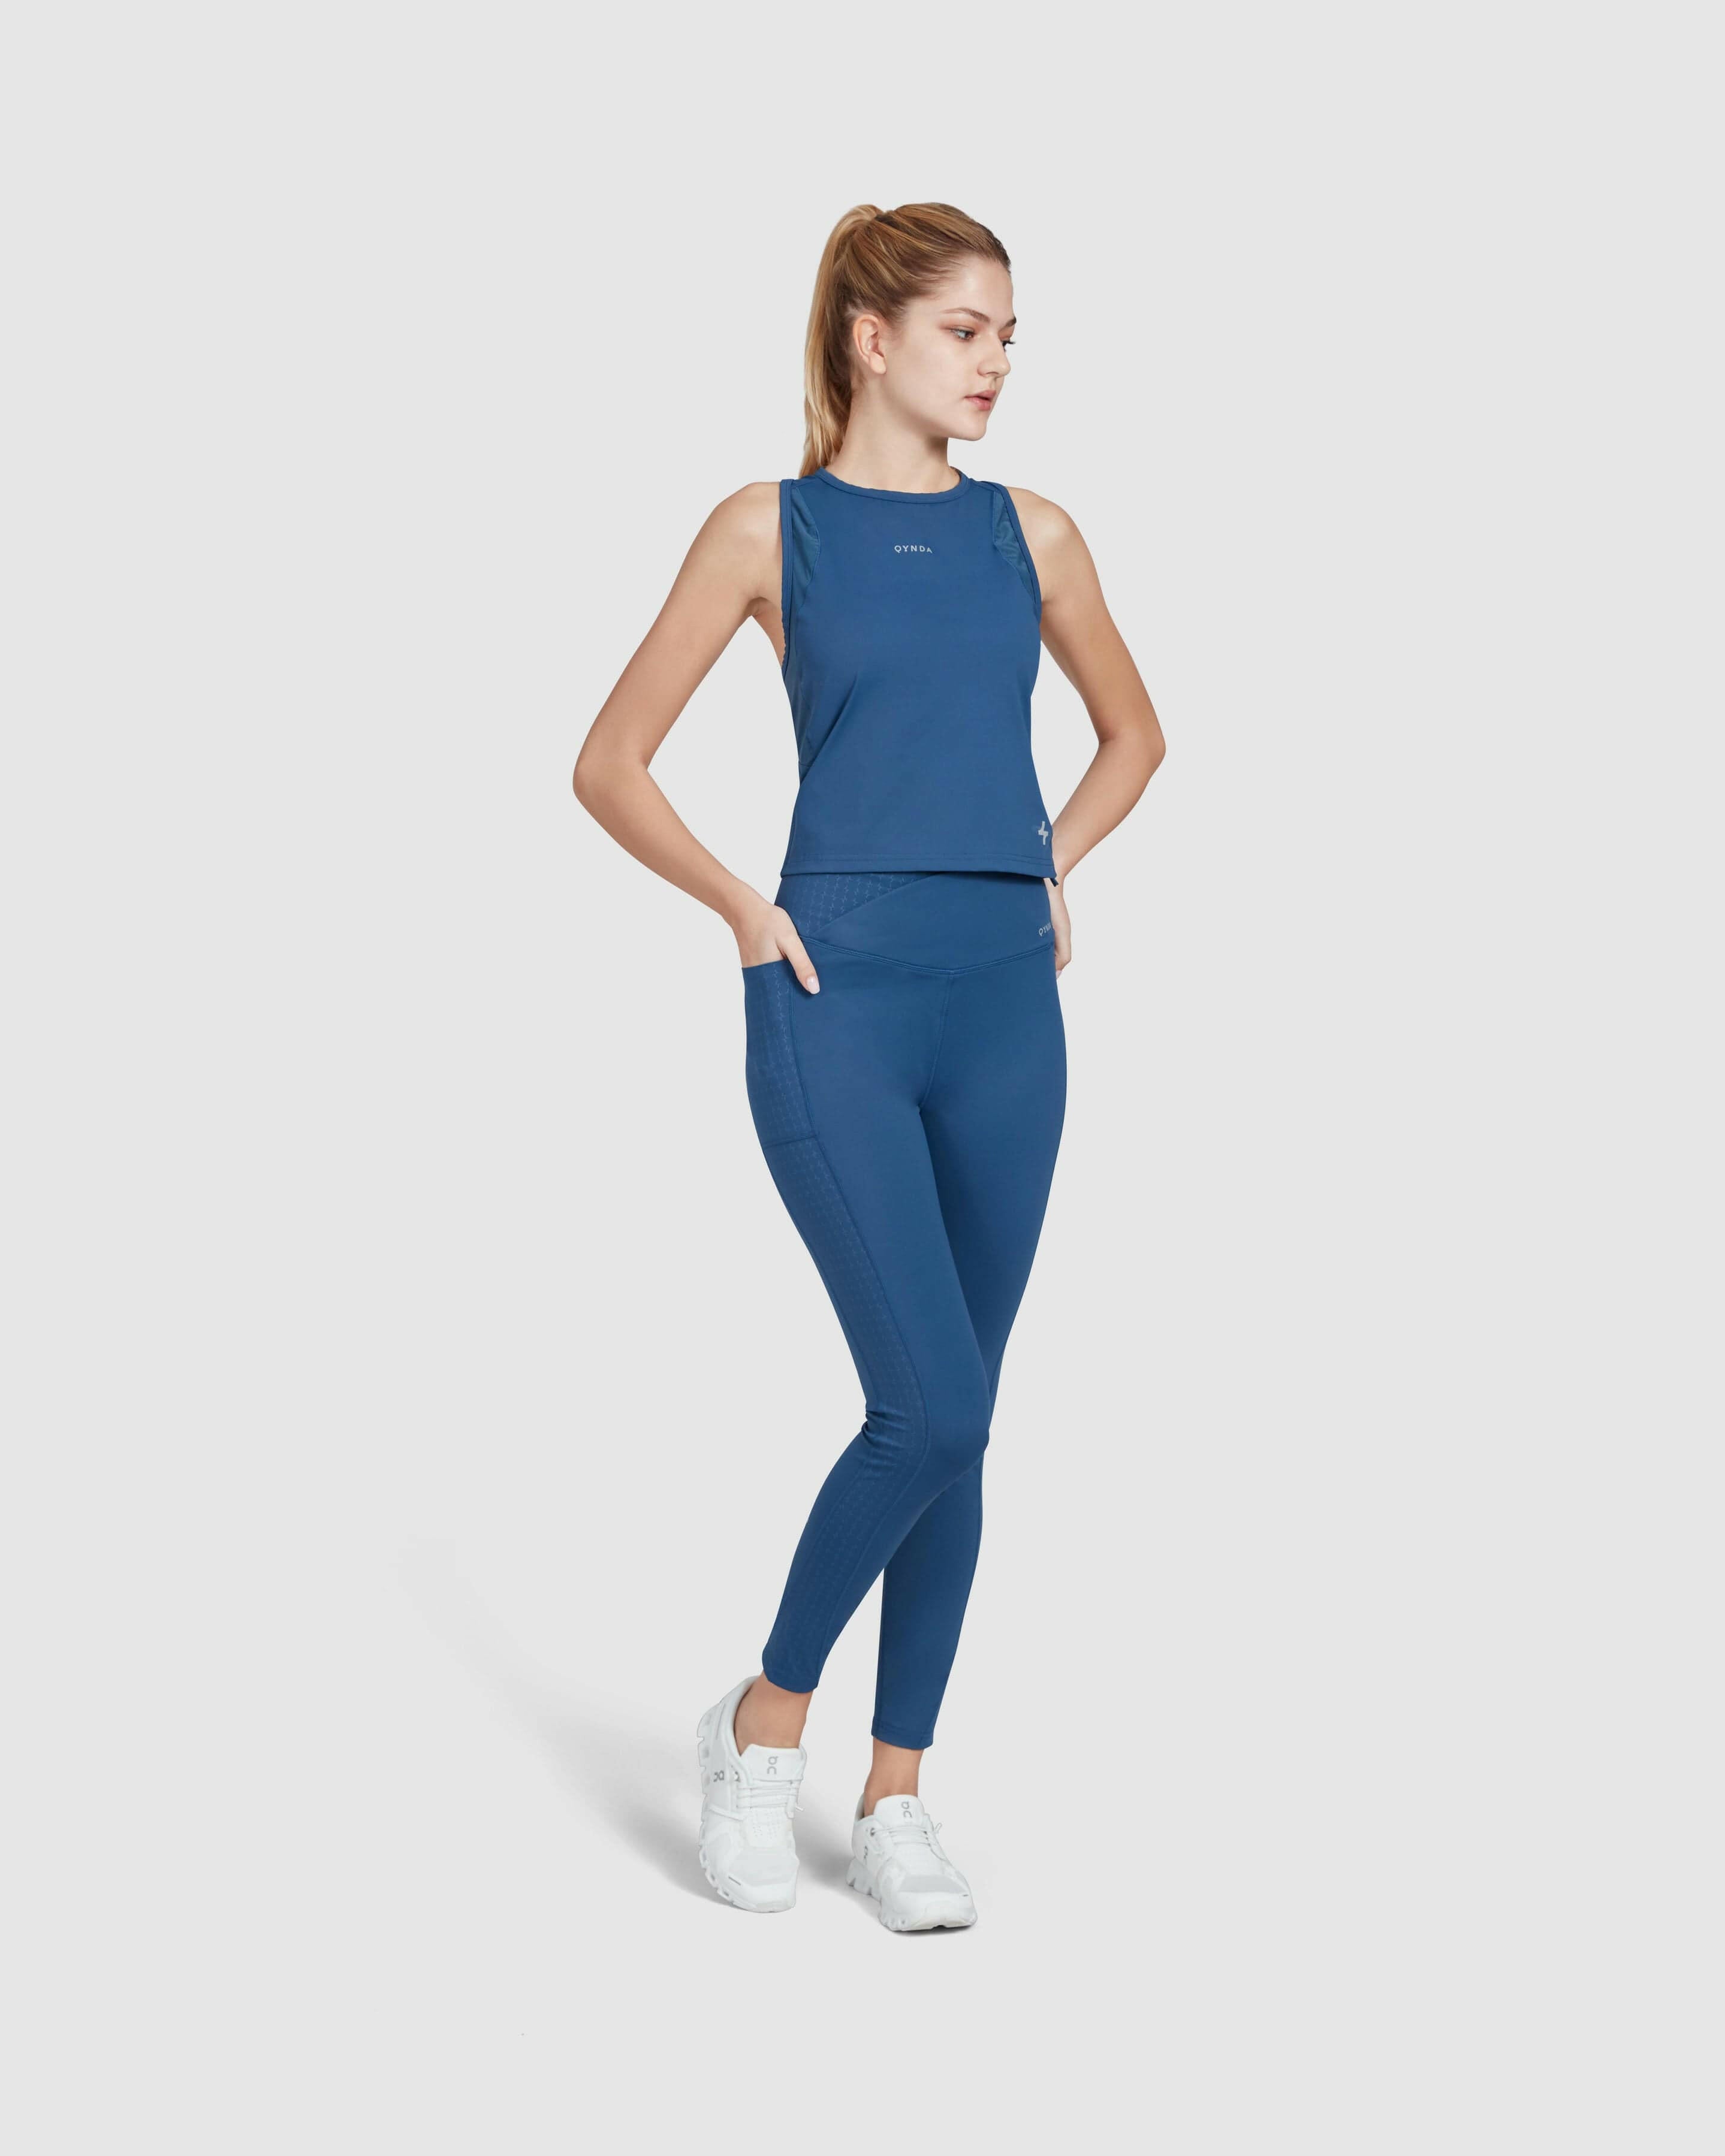 A model stands confidently, modeling Dark Denim color and matching Modest LADINA LEGGINGS from QYNDA, complemented by white sneakers, against a clean white background.